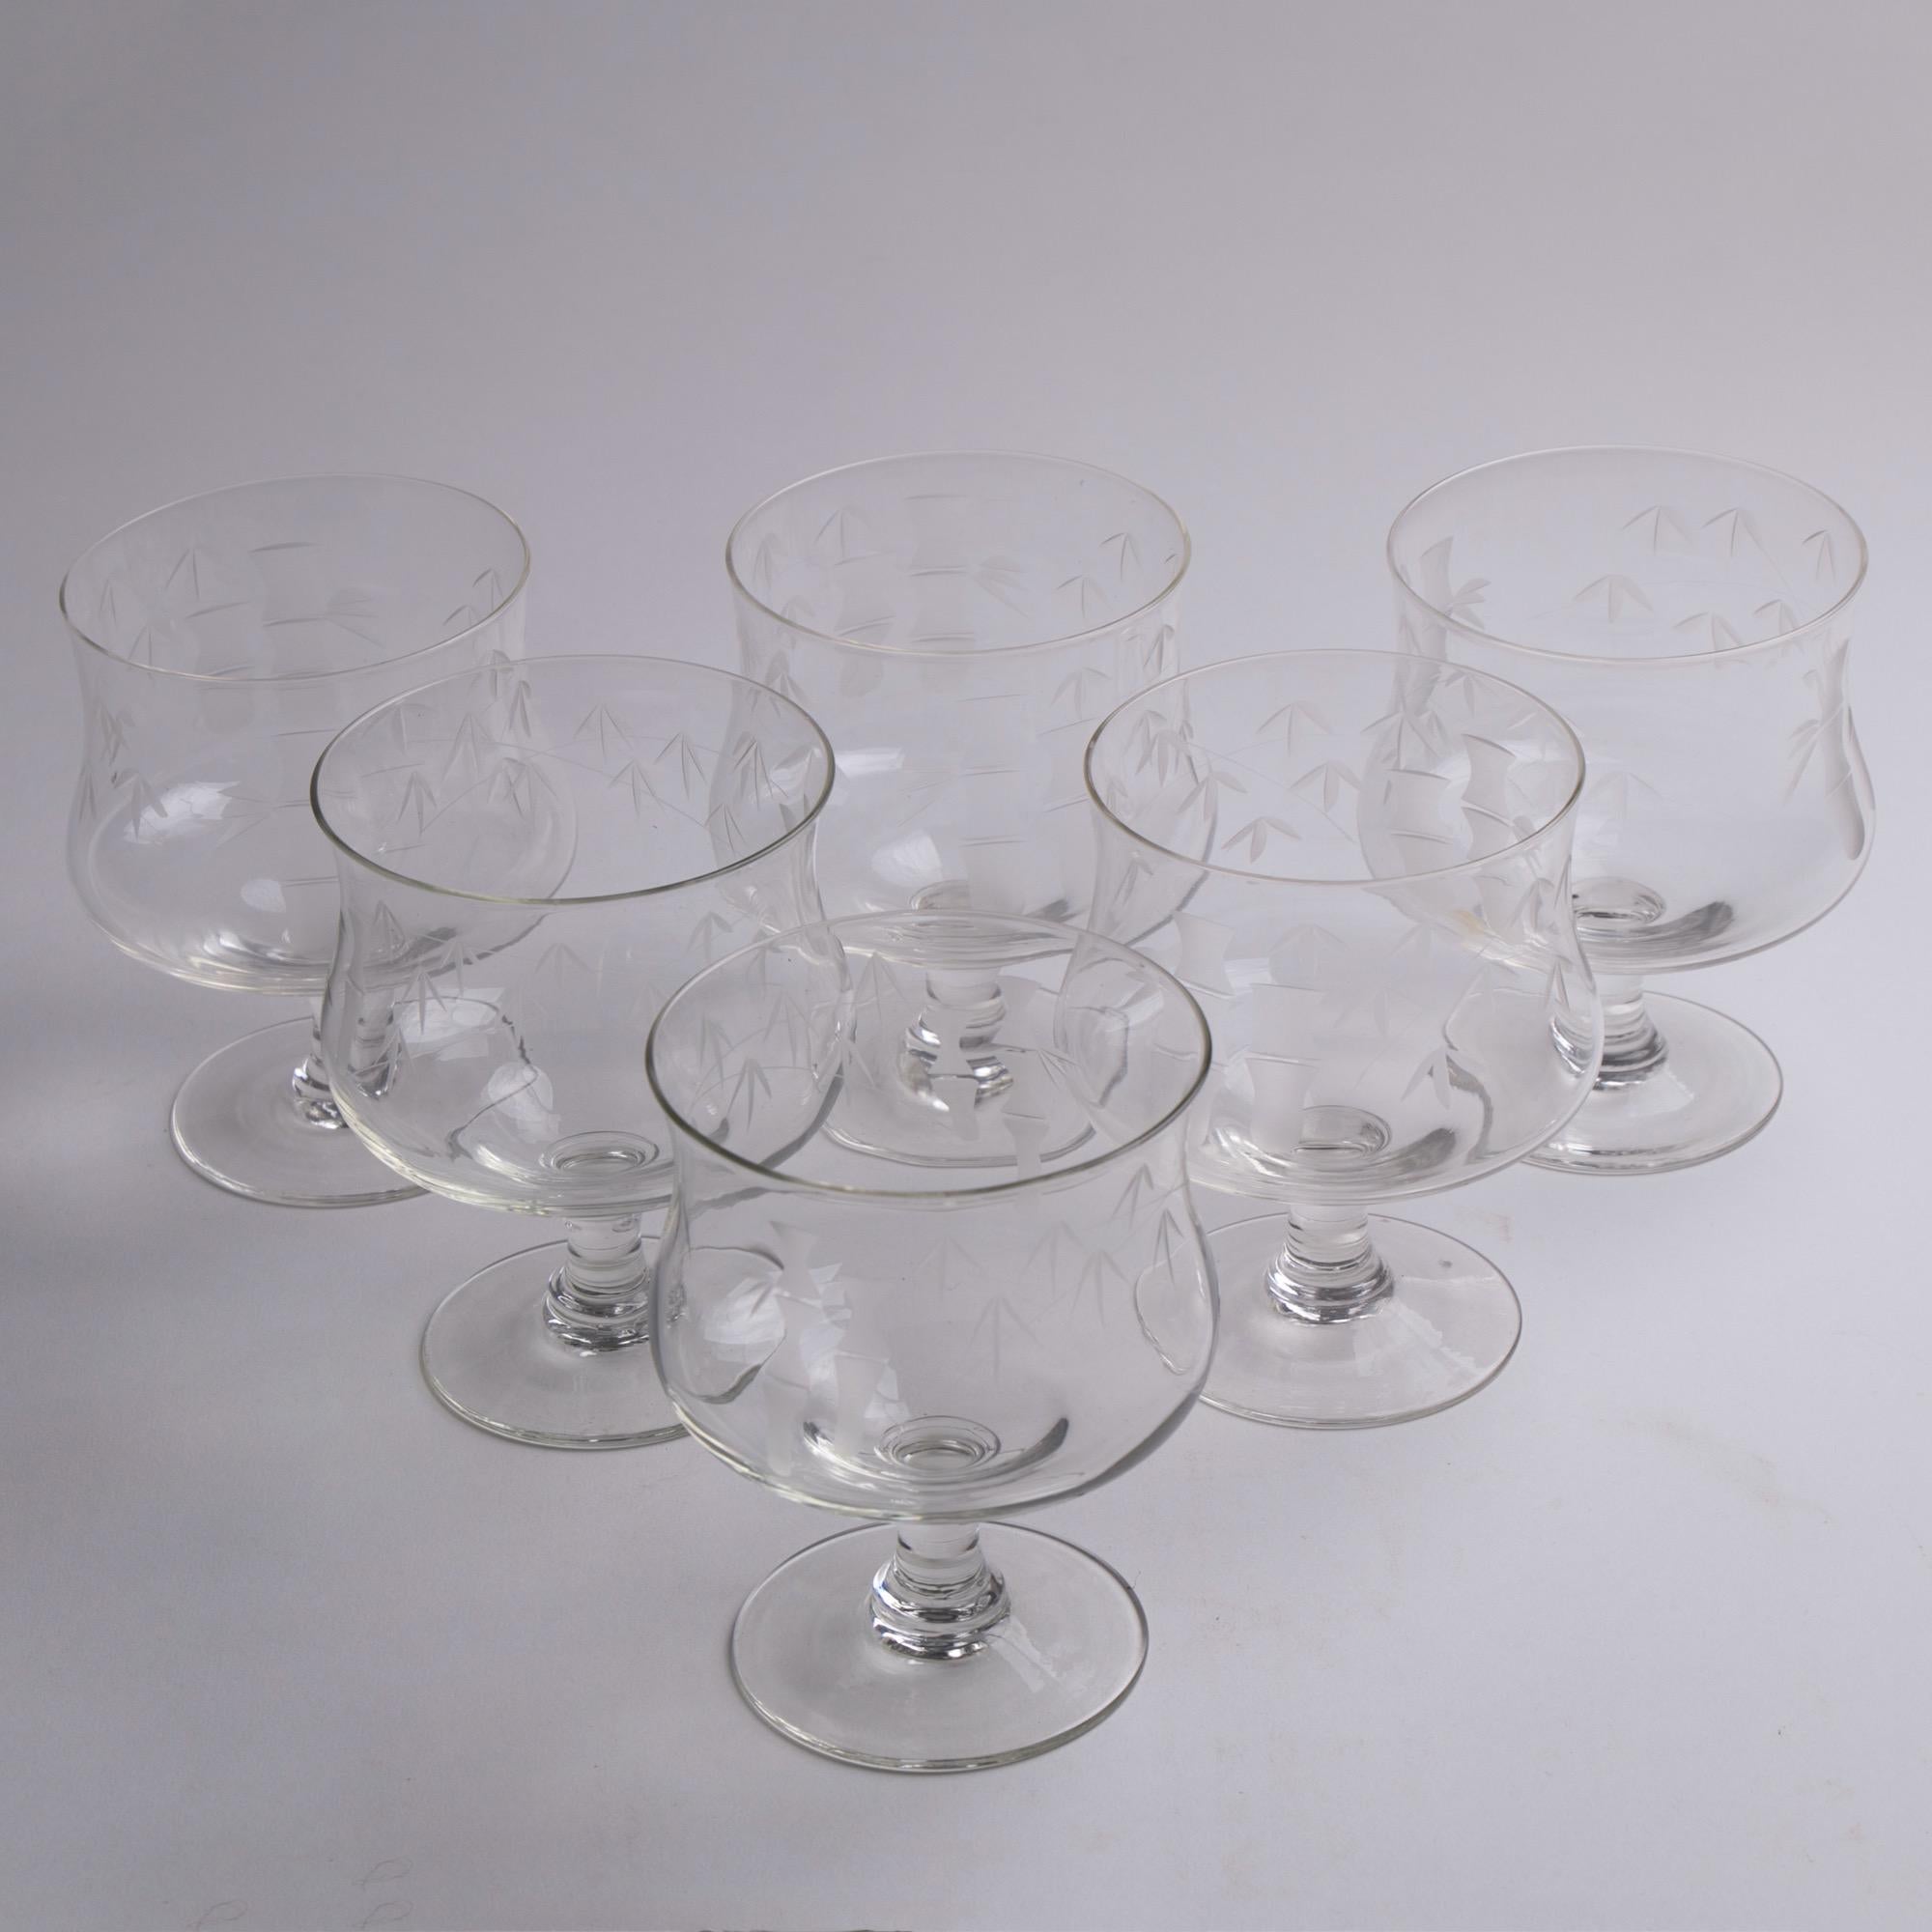 Set of six Art Deco wine glasses, French, circa 1930
Measures: H 12cm, W 9.5cm
Etched bamboo design to bowl.